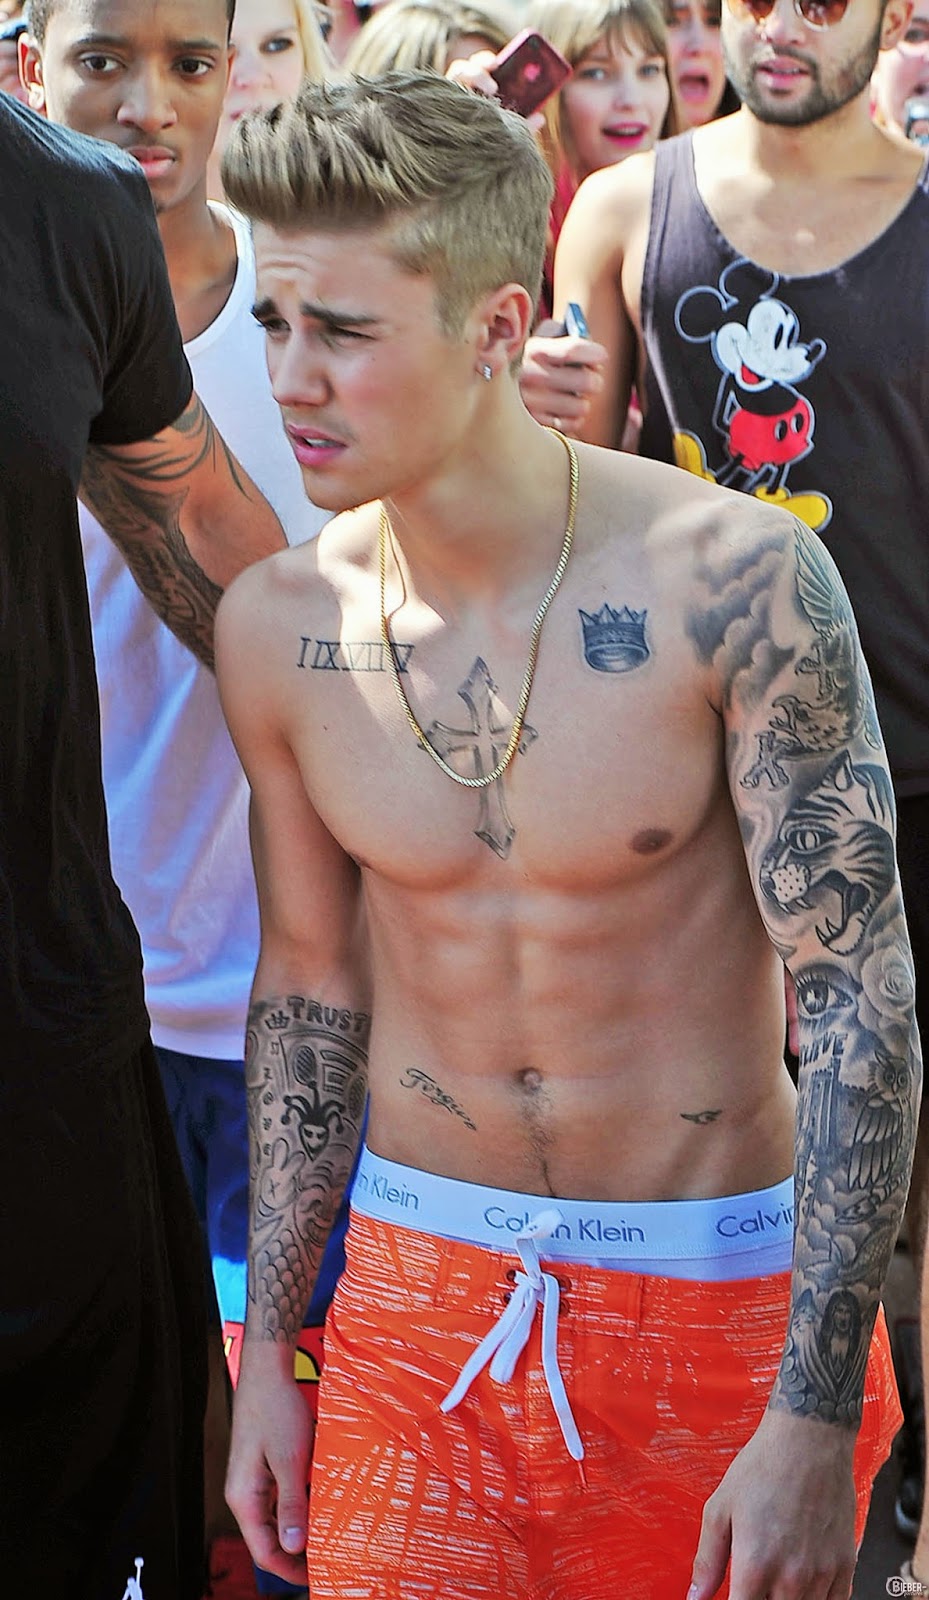 Celeb Saggers Justin Bieber Shows Off More Than Just His Abs And Sag